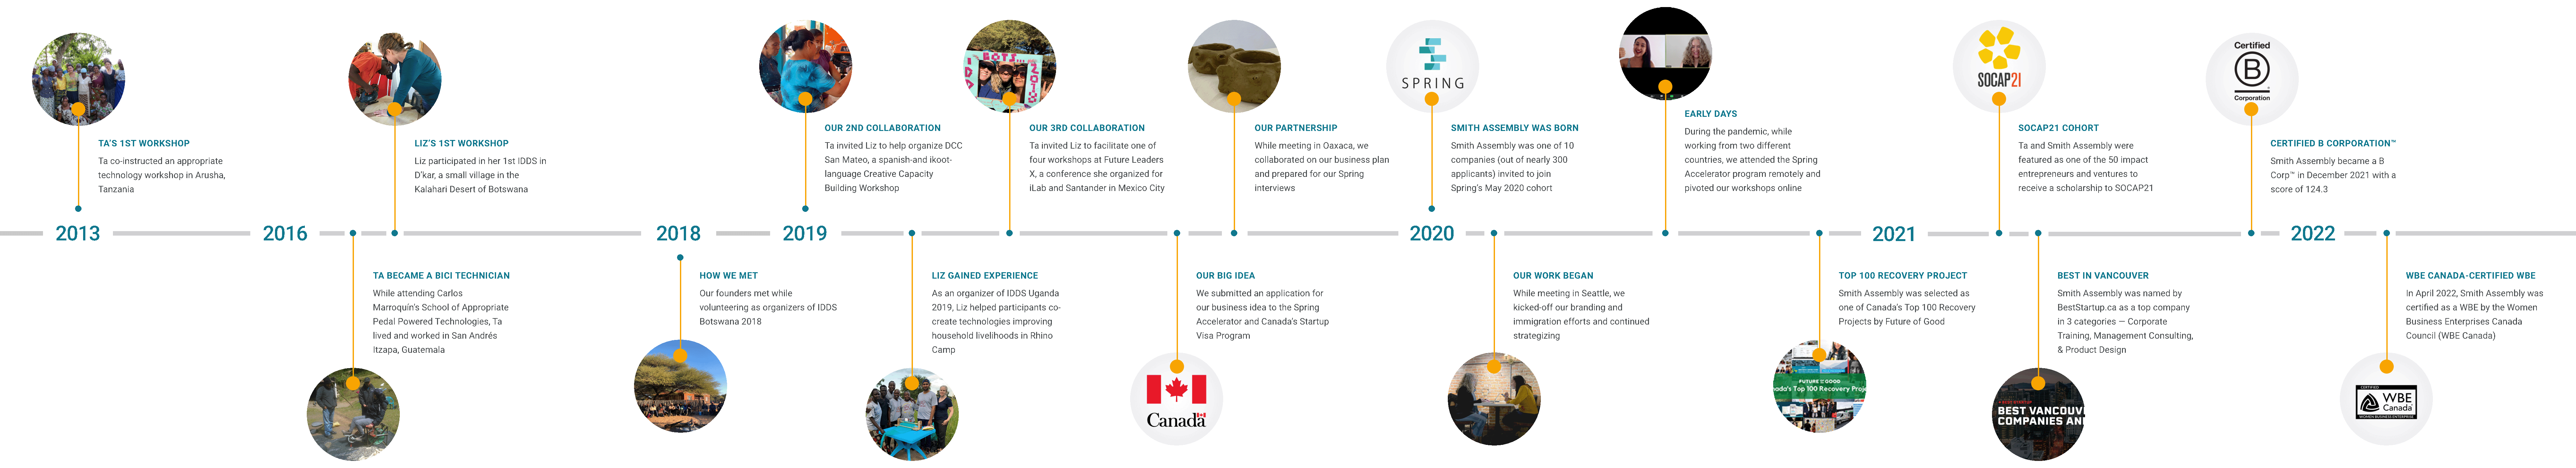 our timeline from smith assembly’s founding and our selection as one of canada’s top 100 recovery projects in 2020 to our certification as a b corp in 2021 and certification as a wbe in 2022